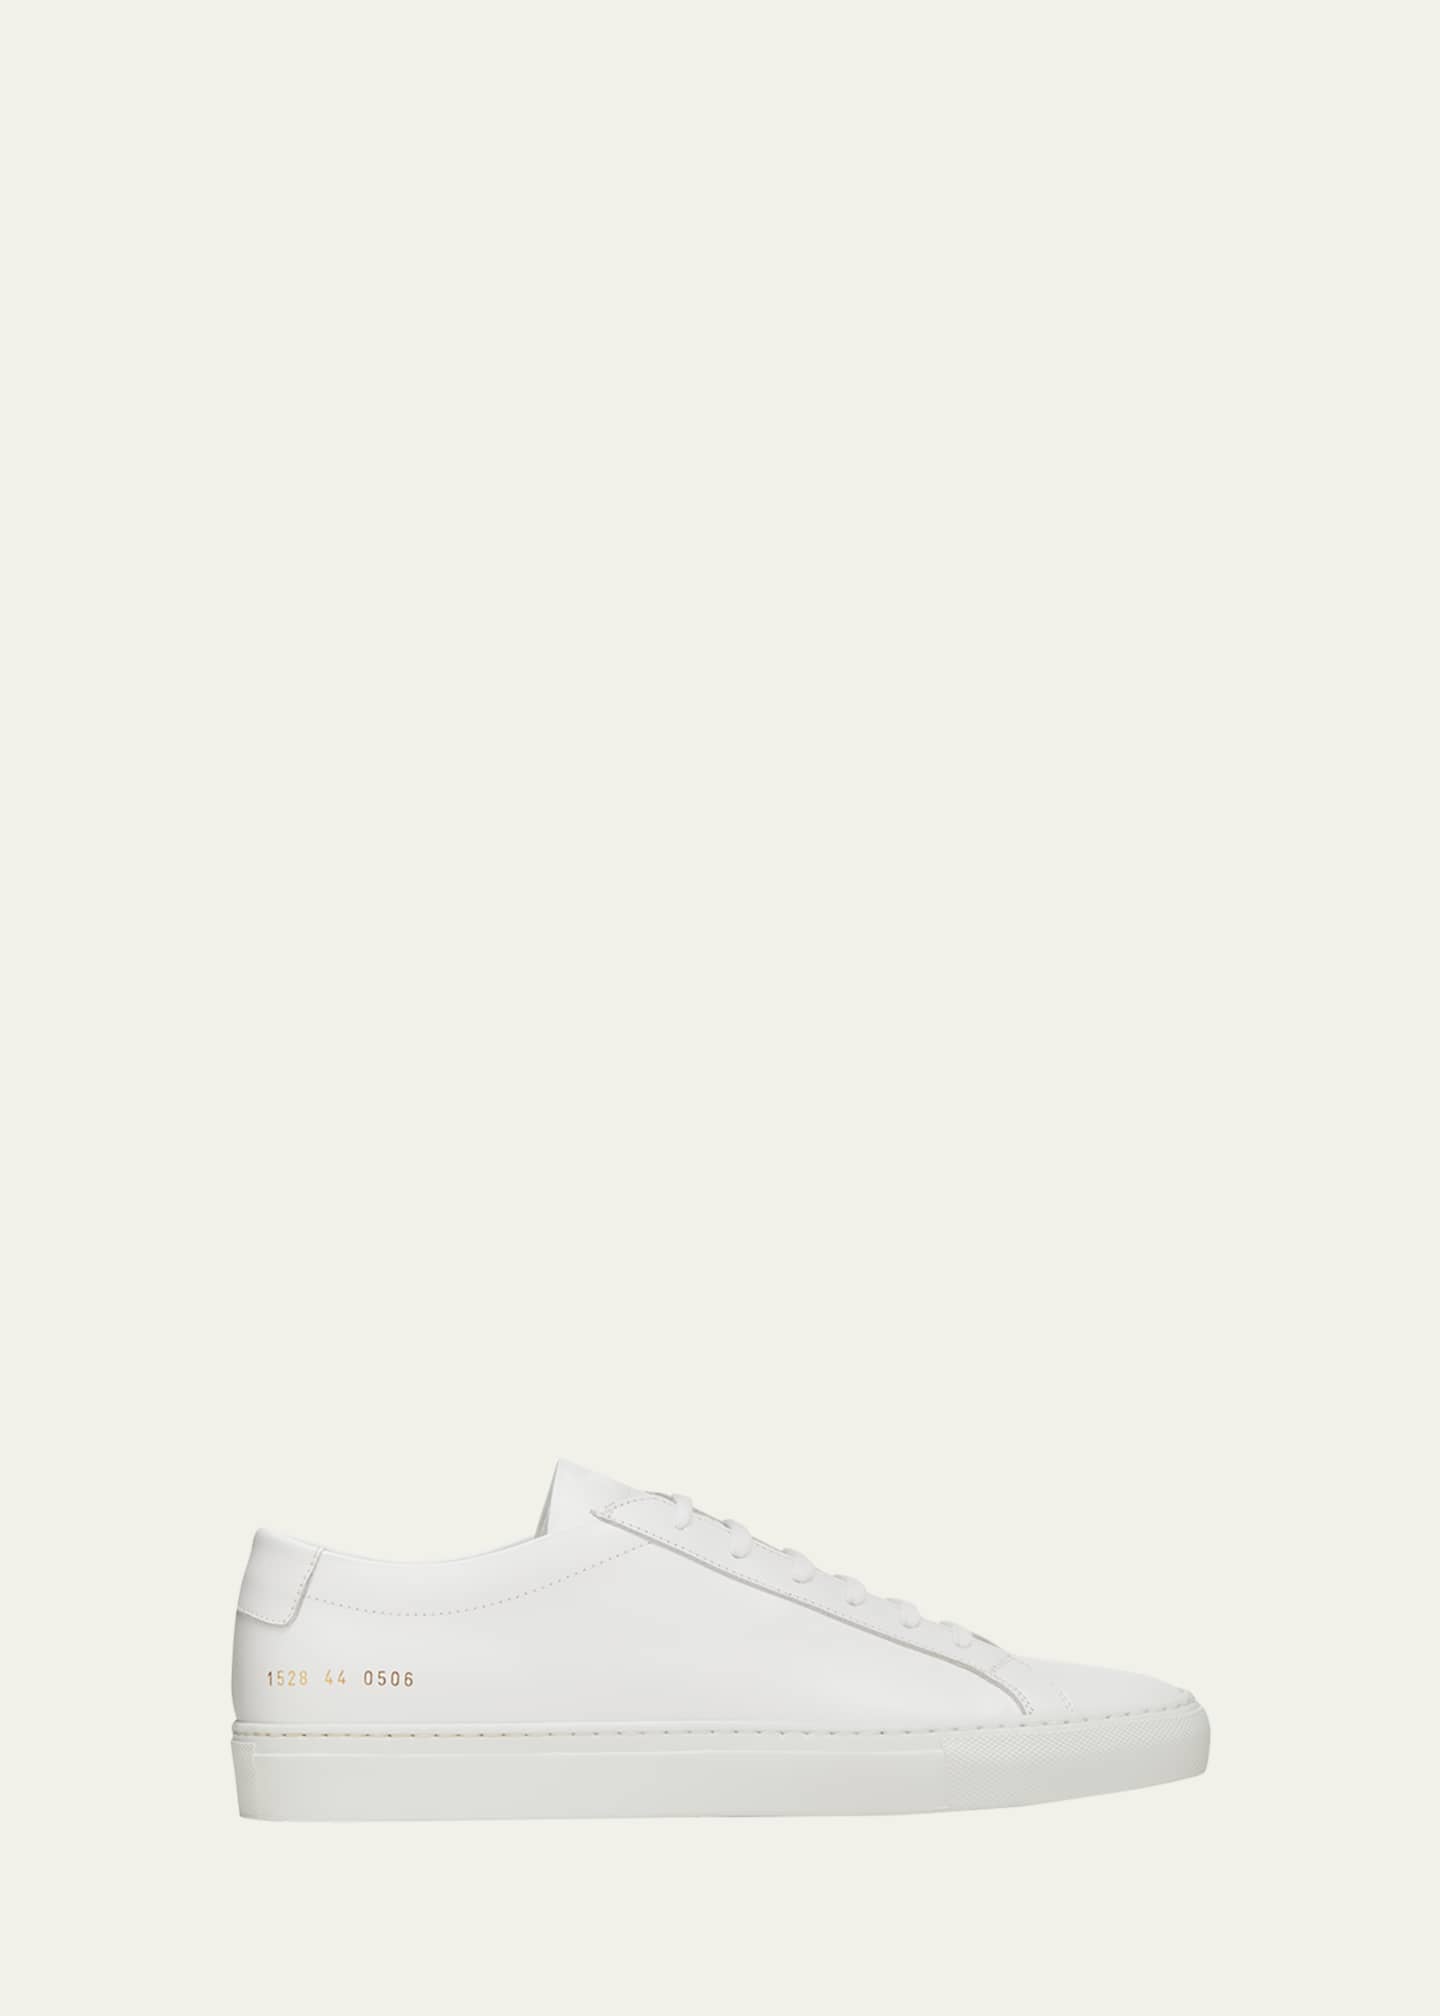 Common Projects Achilles White 44 - スニーカー